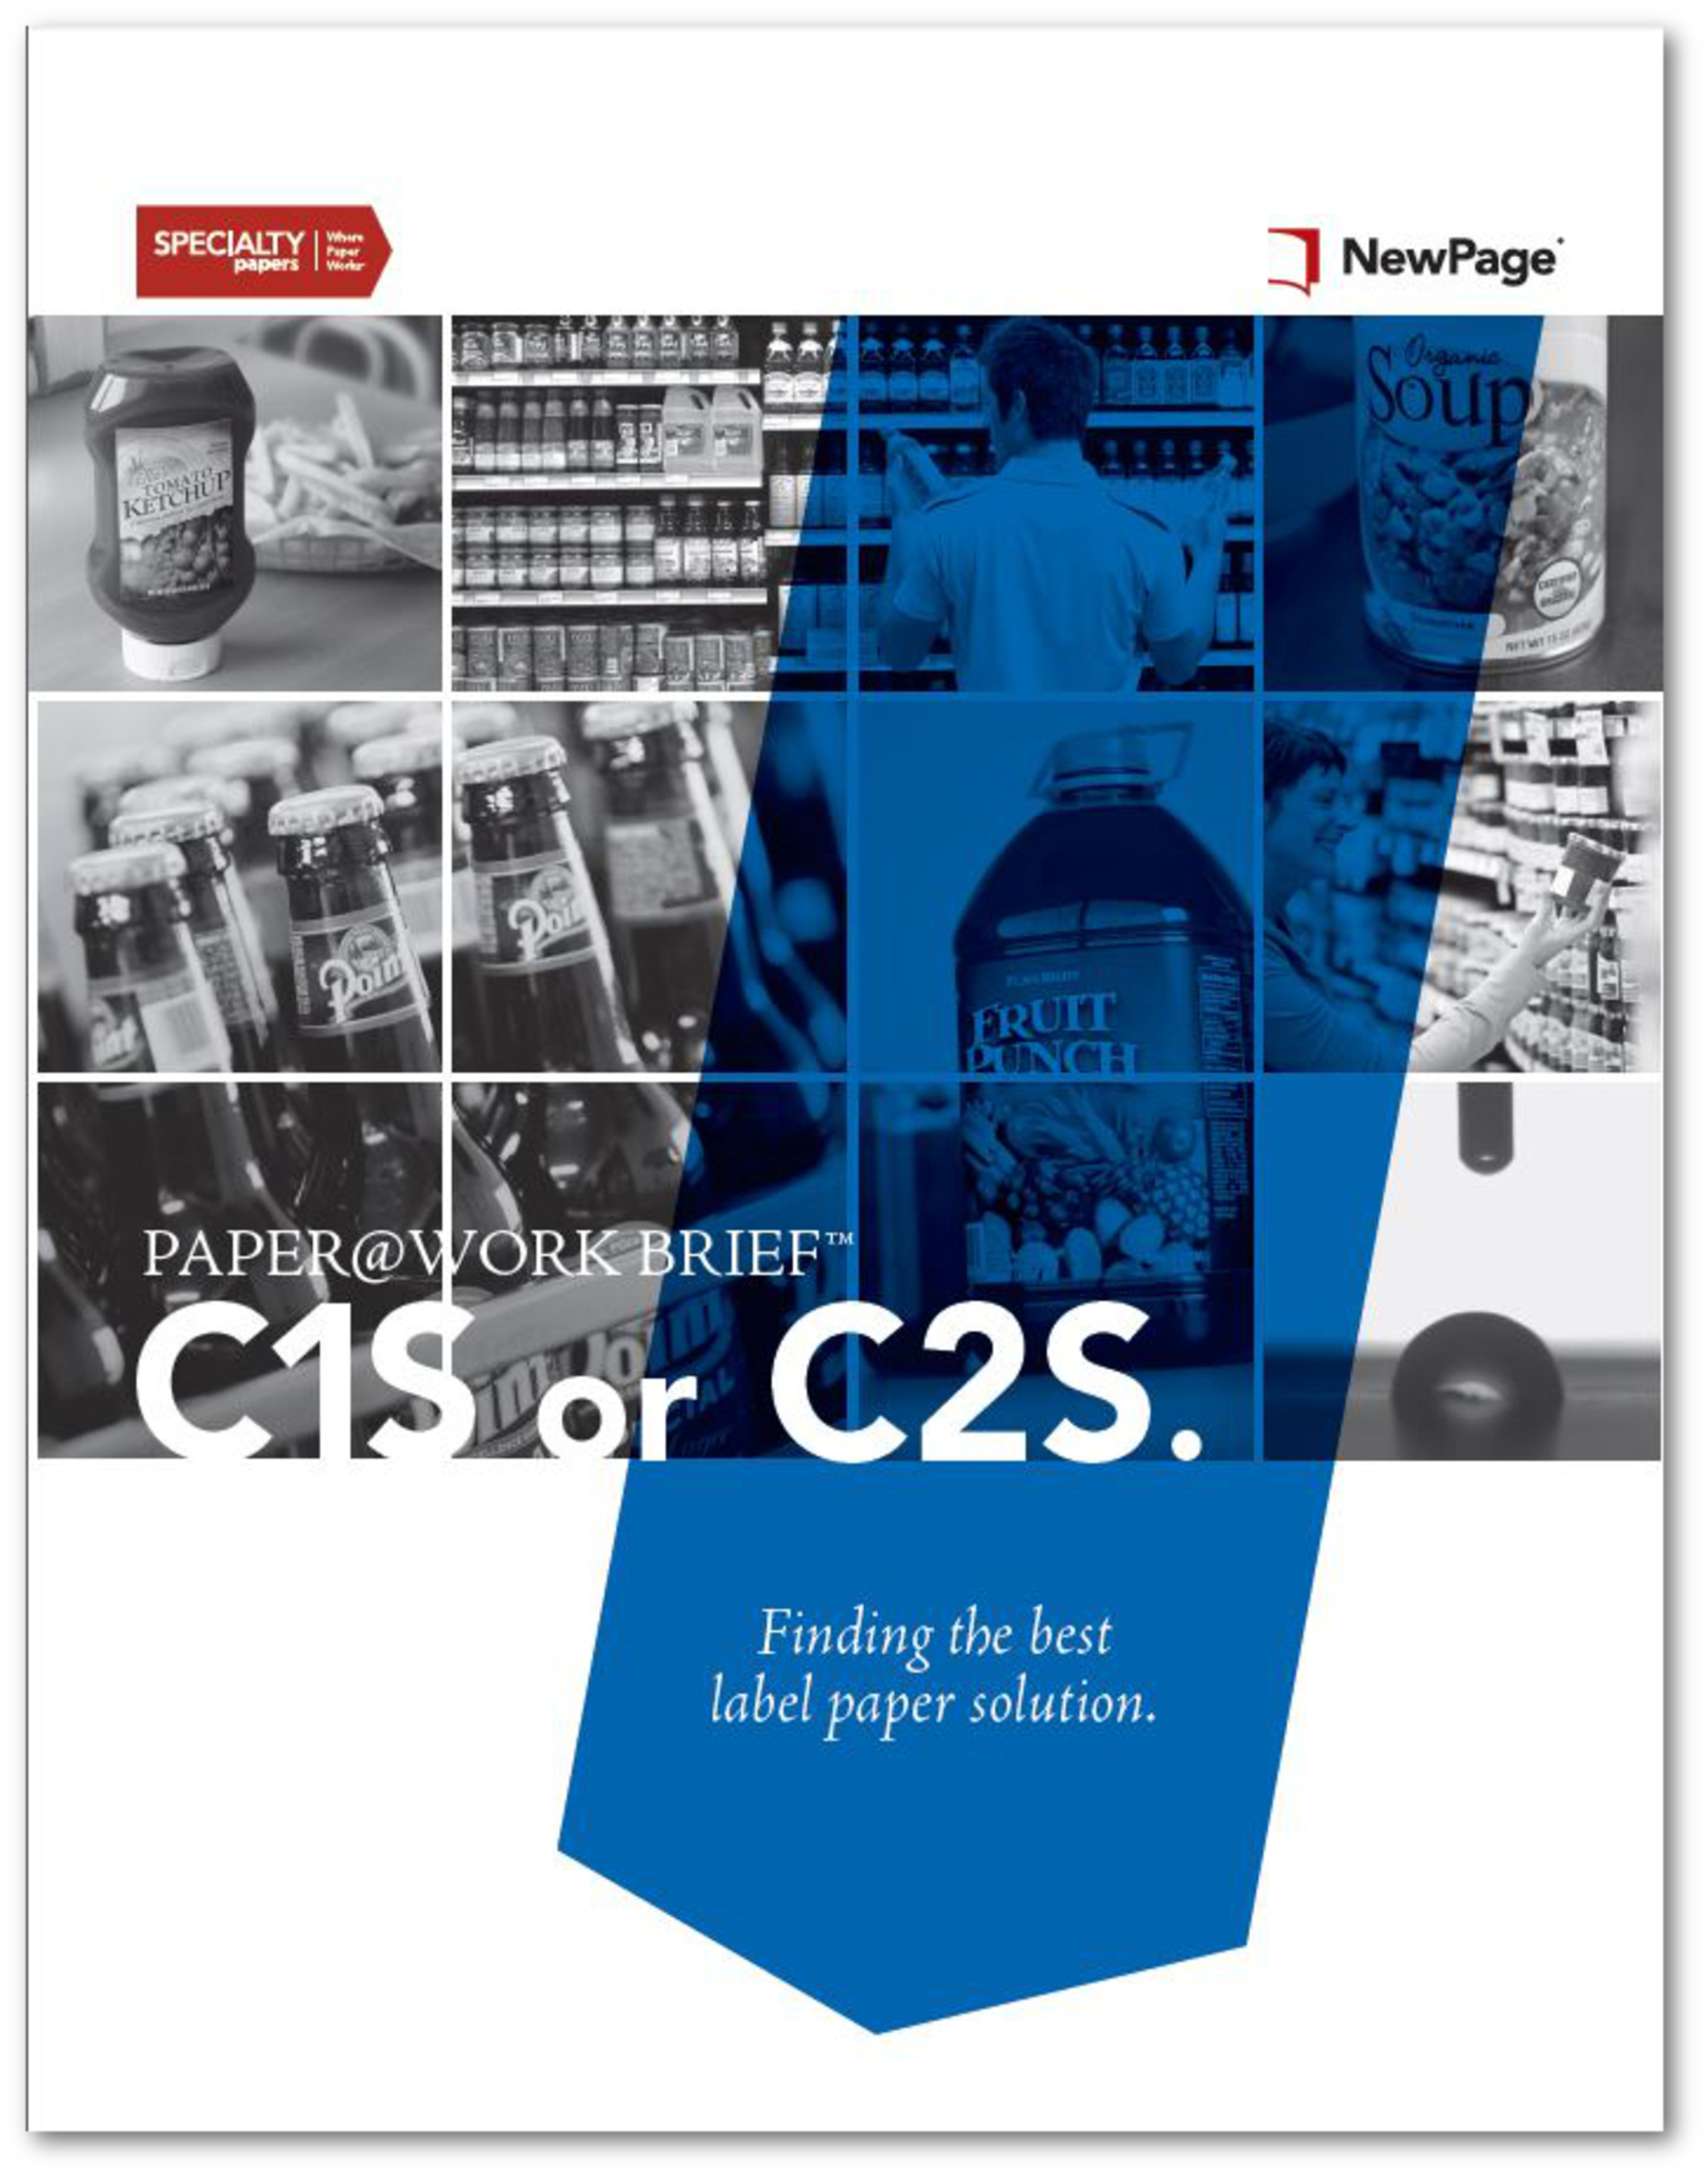 NEWPAGE INTRODUCES SECOND PAPER@WORK BRIEF ON SPECIALTY PAPER TOPIC:
C1S or C2S. Finding the best label paper solution.
 (PRNewsFoto/NewPage Corporation)